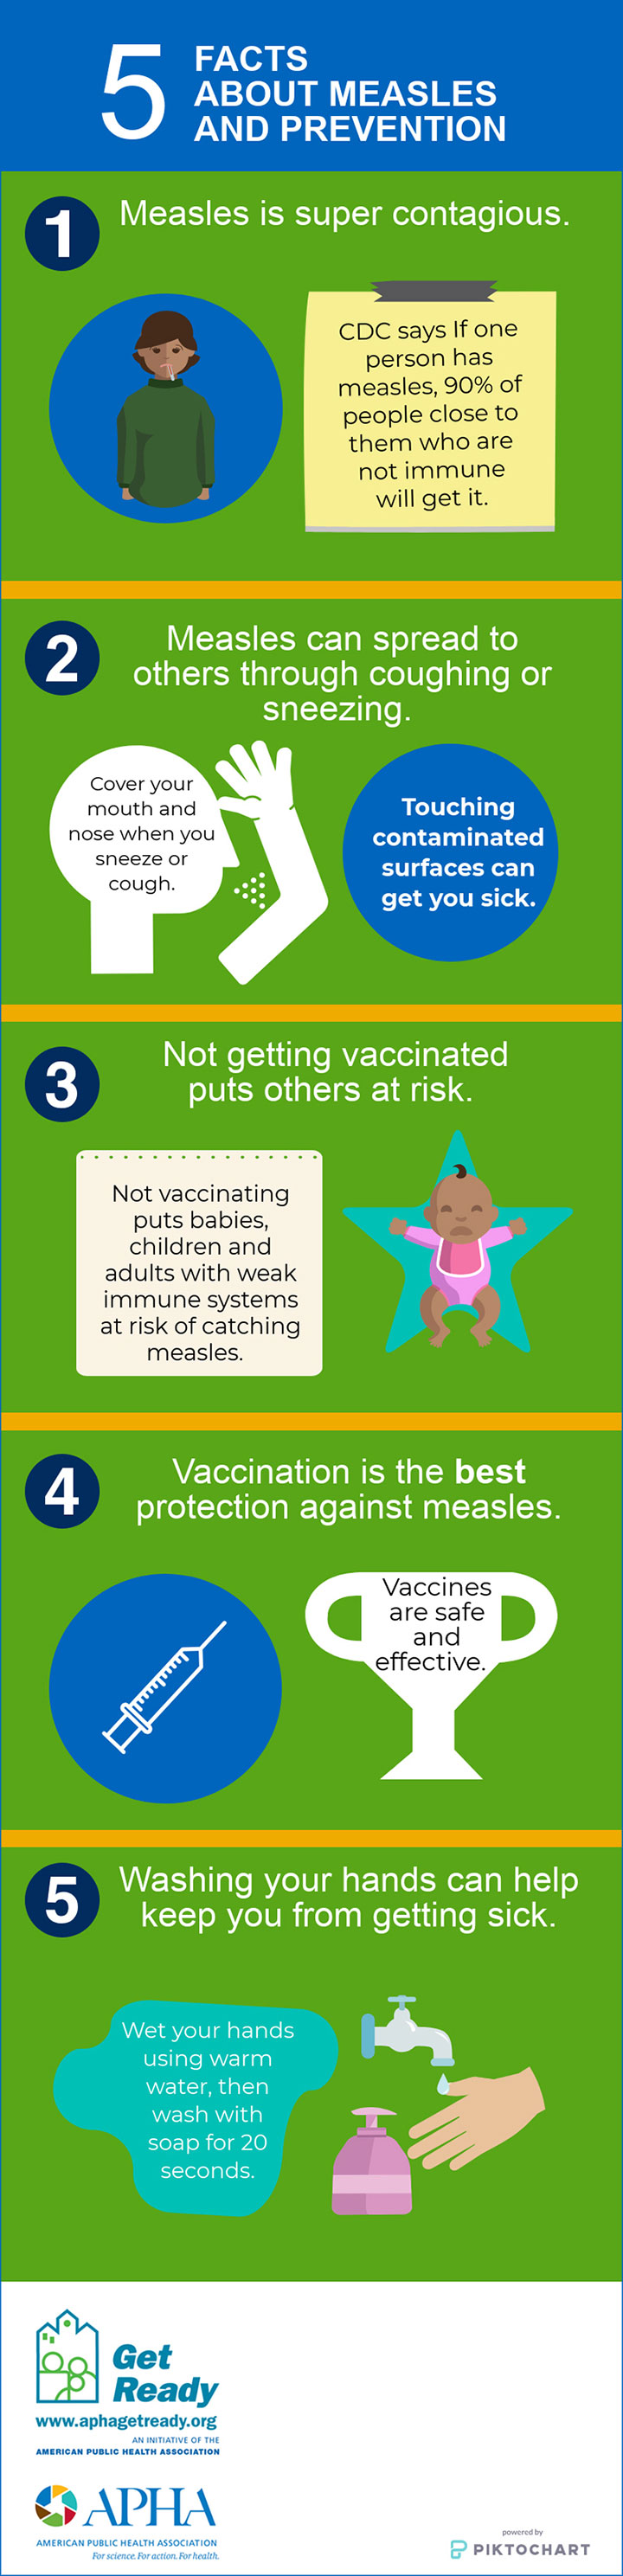 5 facts about measles and prevention